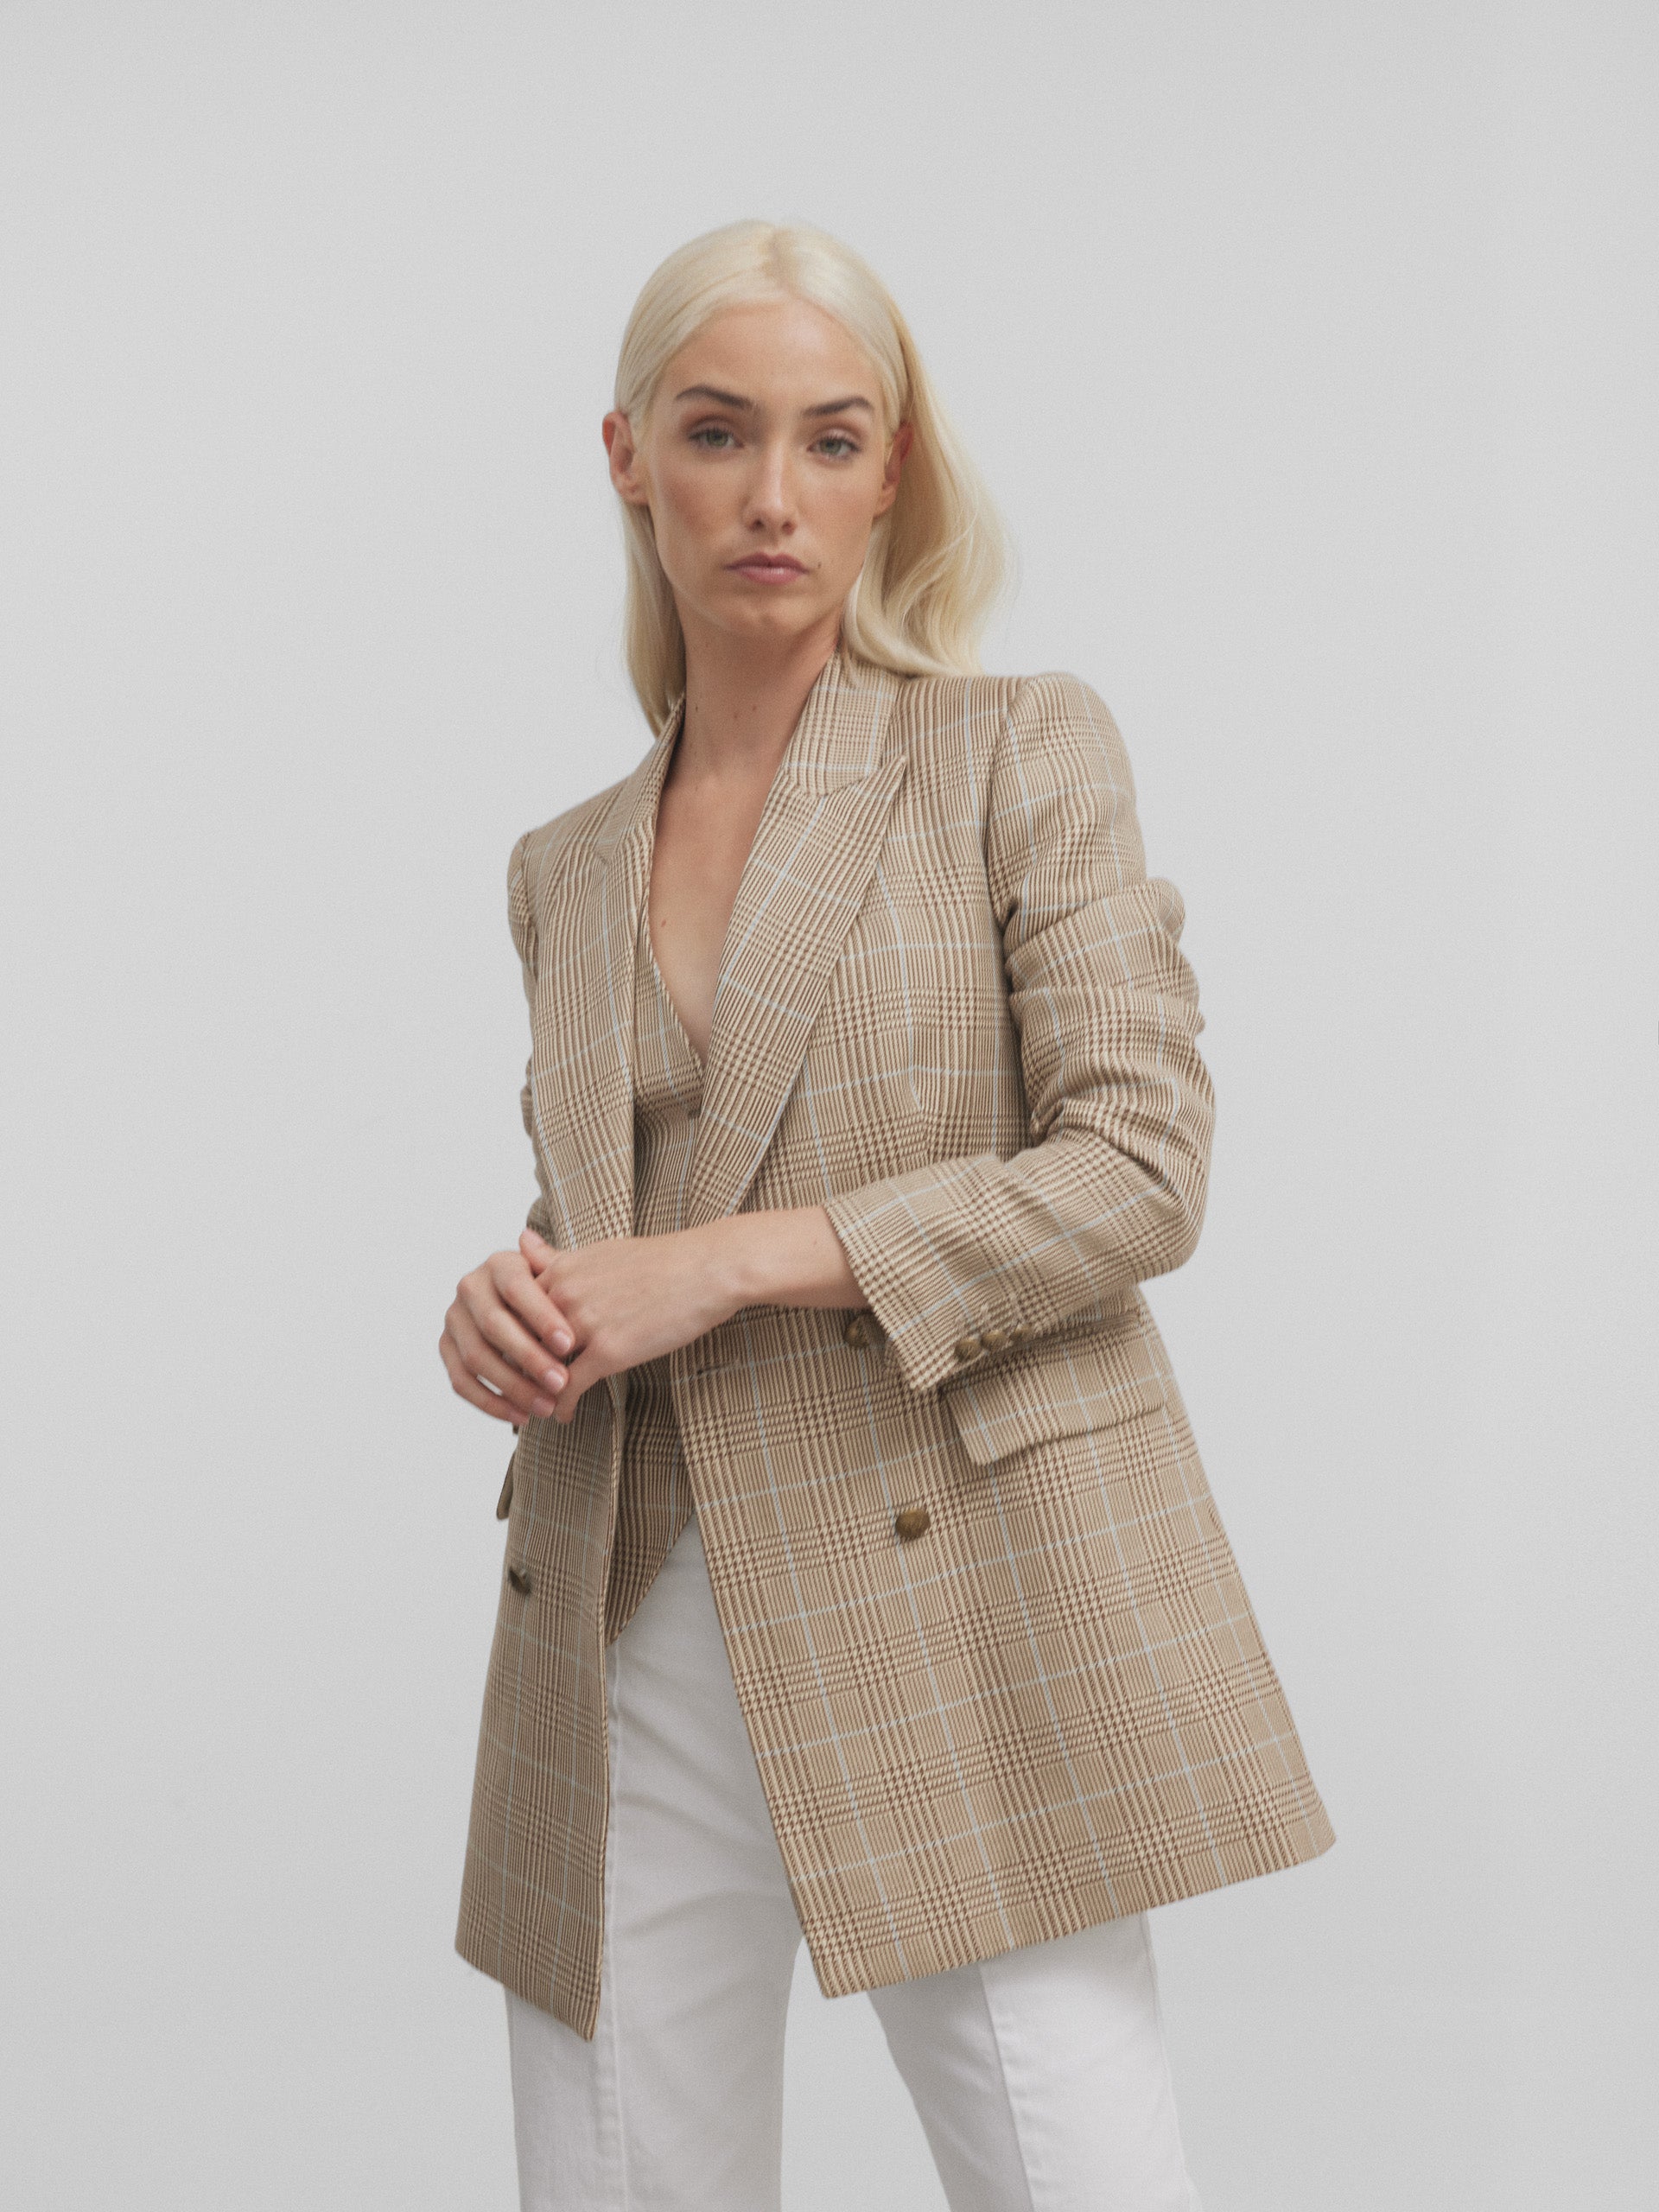 Prince of Wales beige blazer with light blue profile